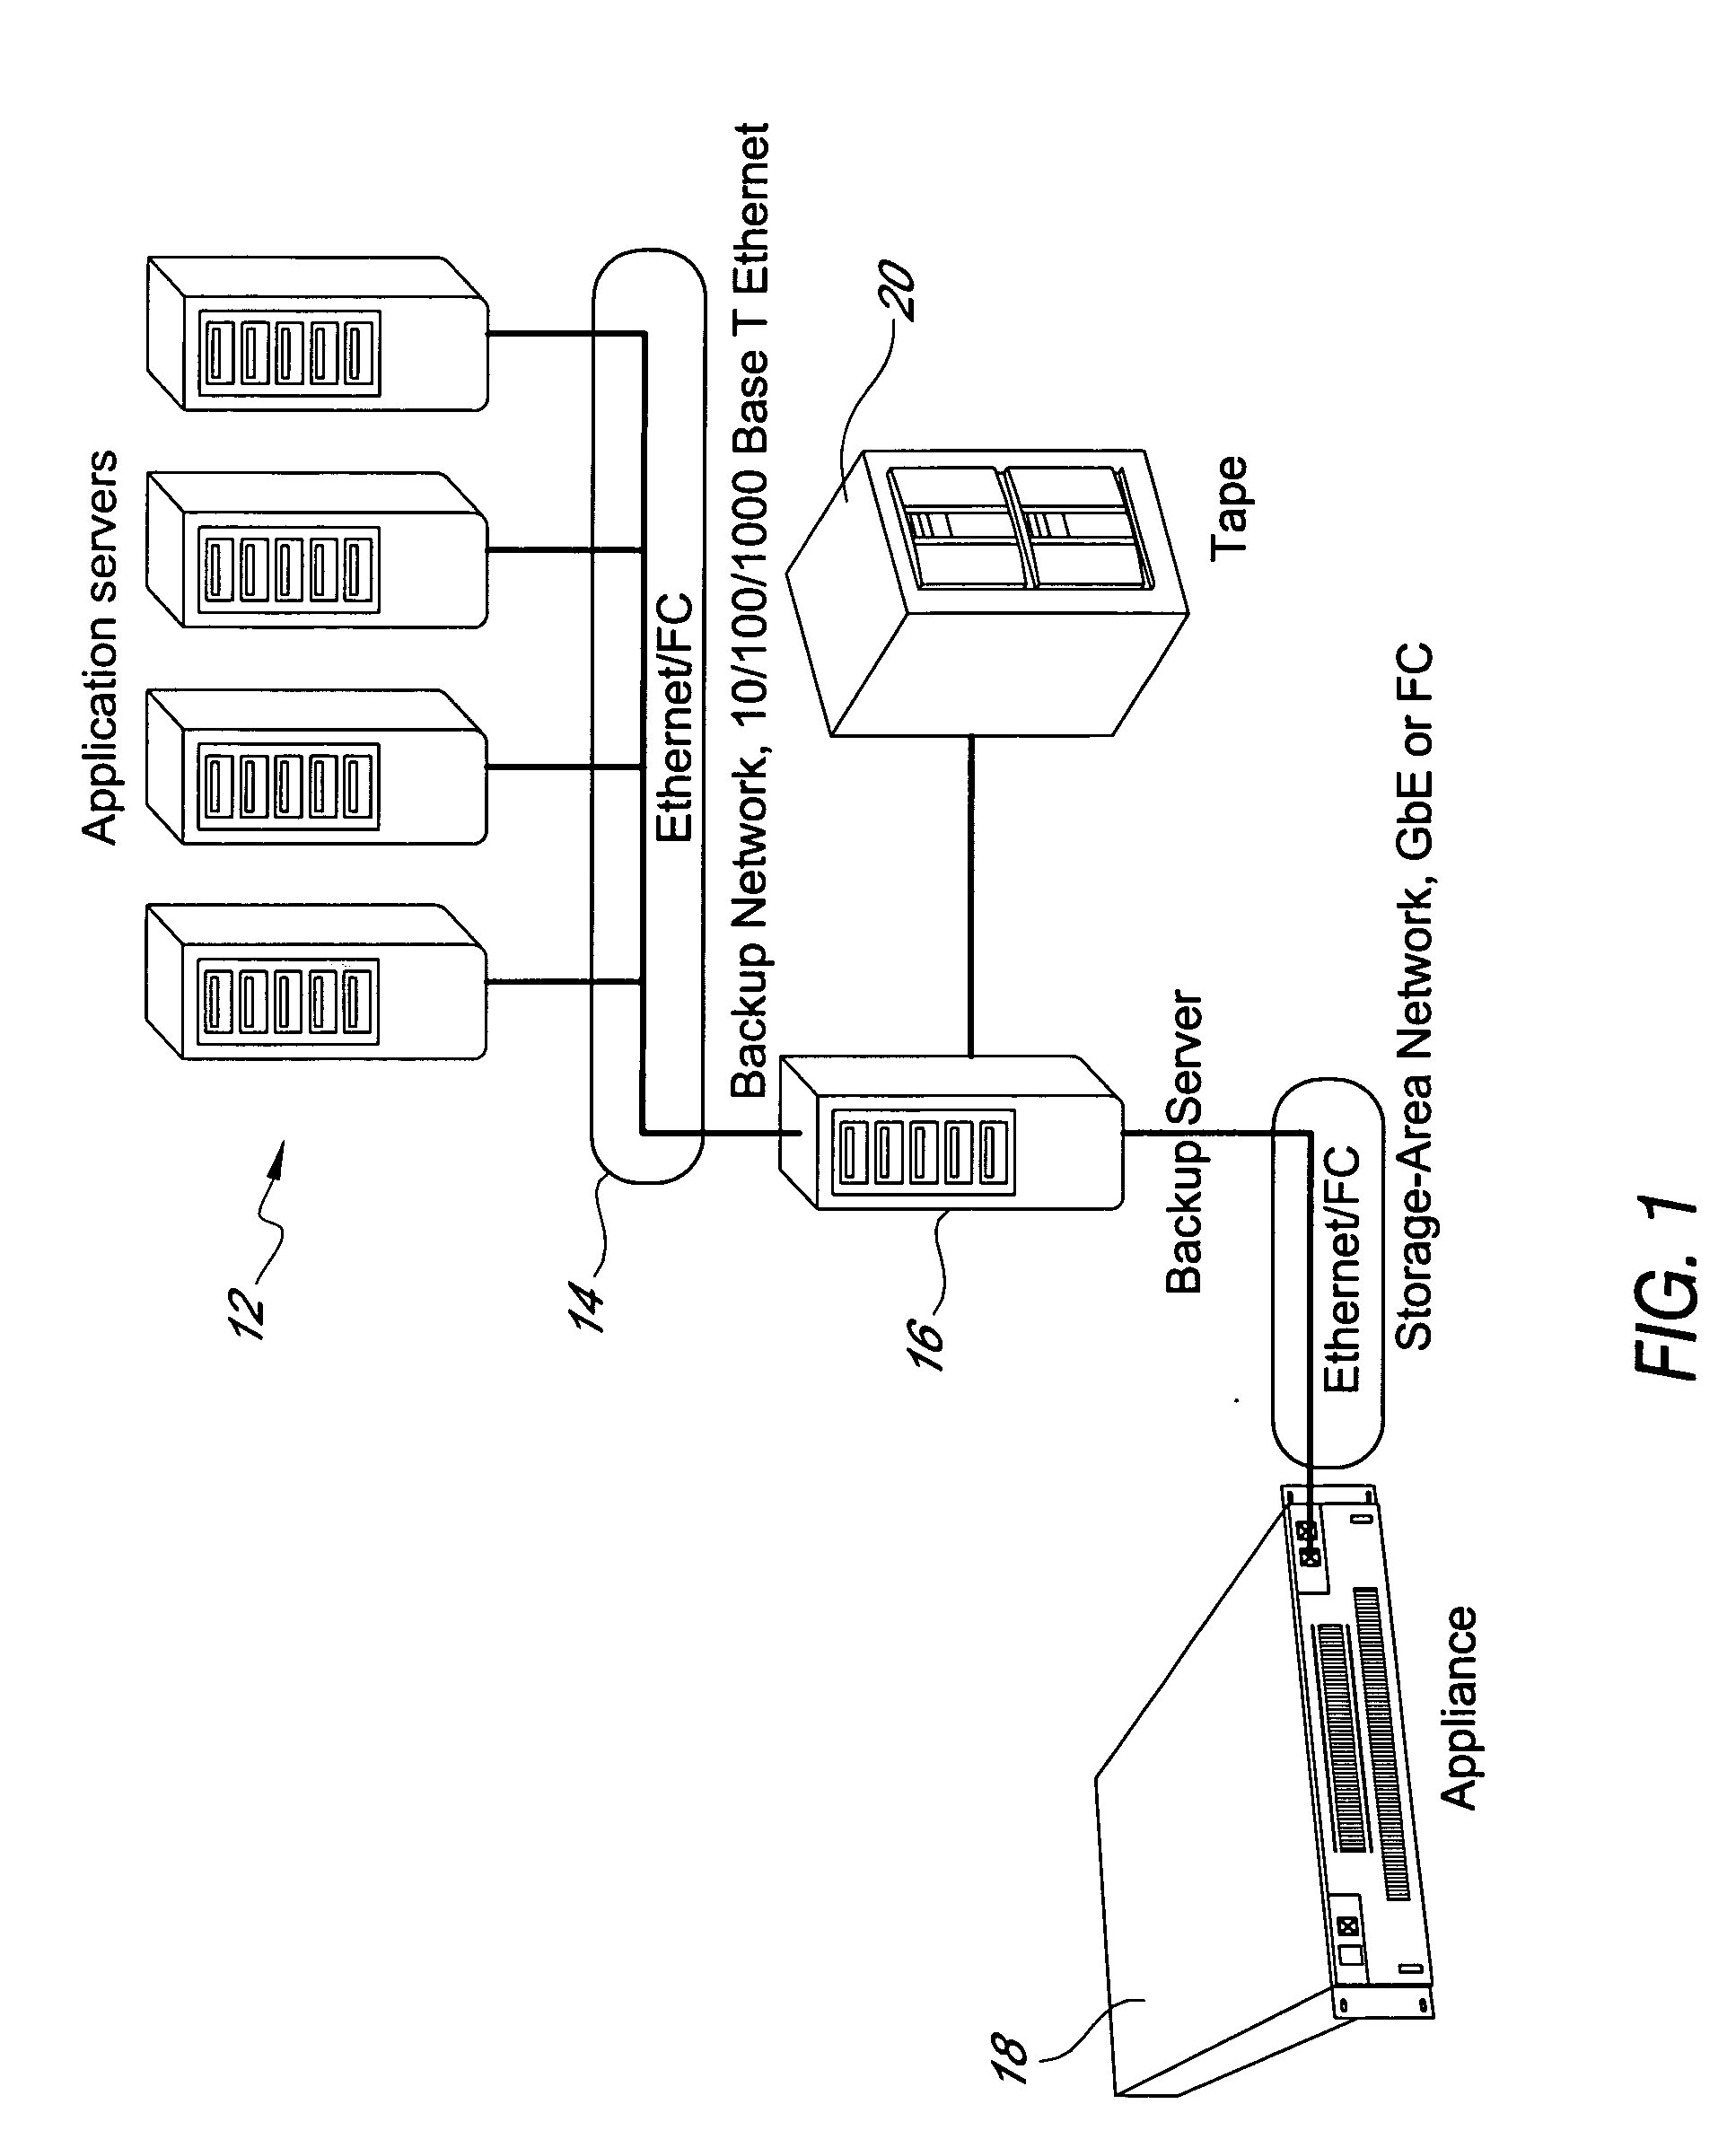 Tape emulating disk based storage system and method with automatically resized emulated tape capacity